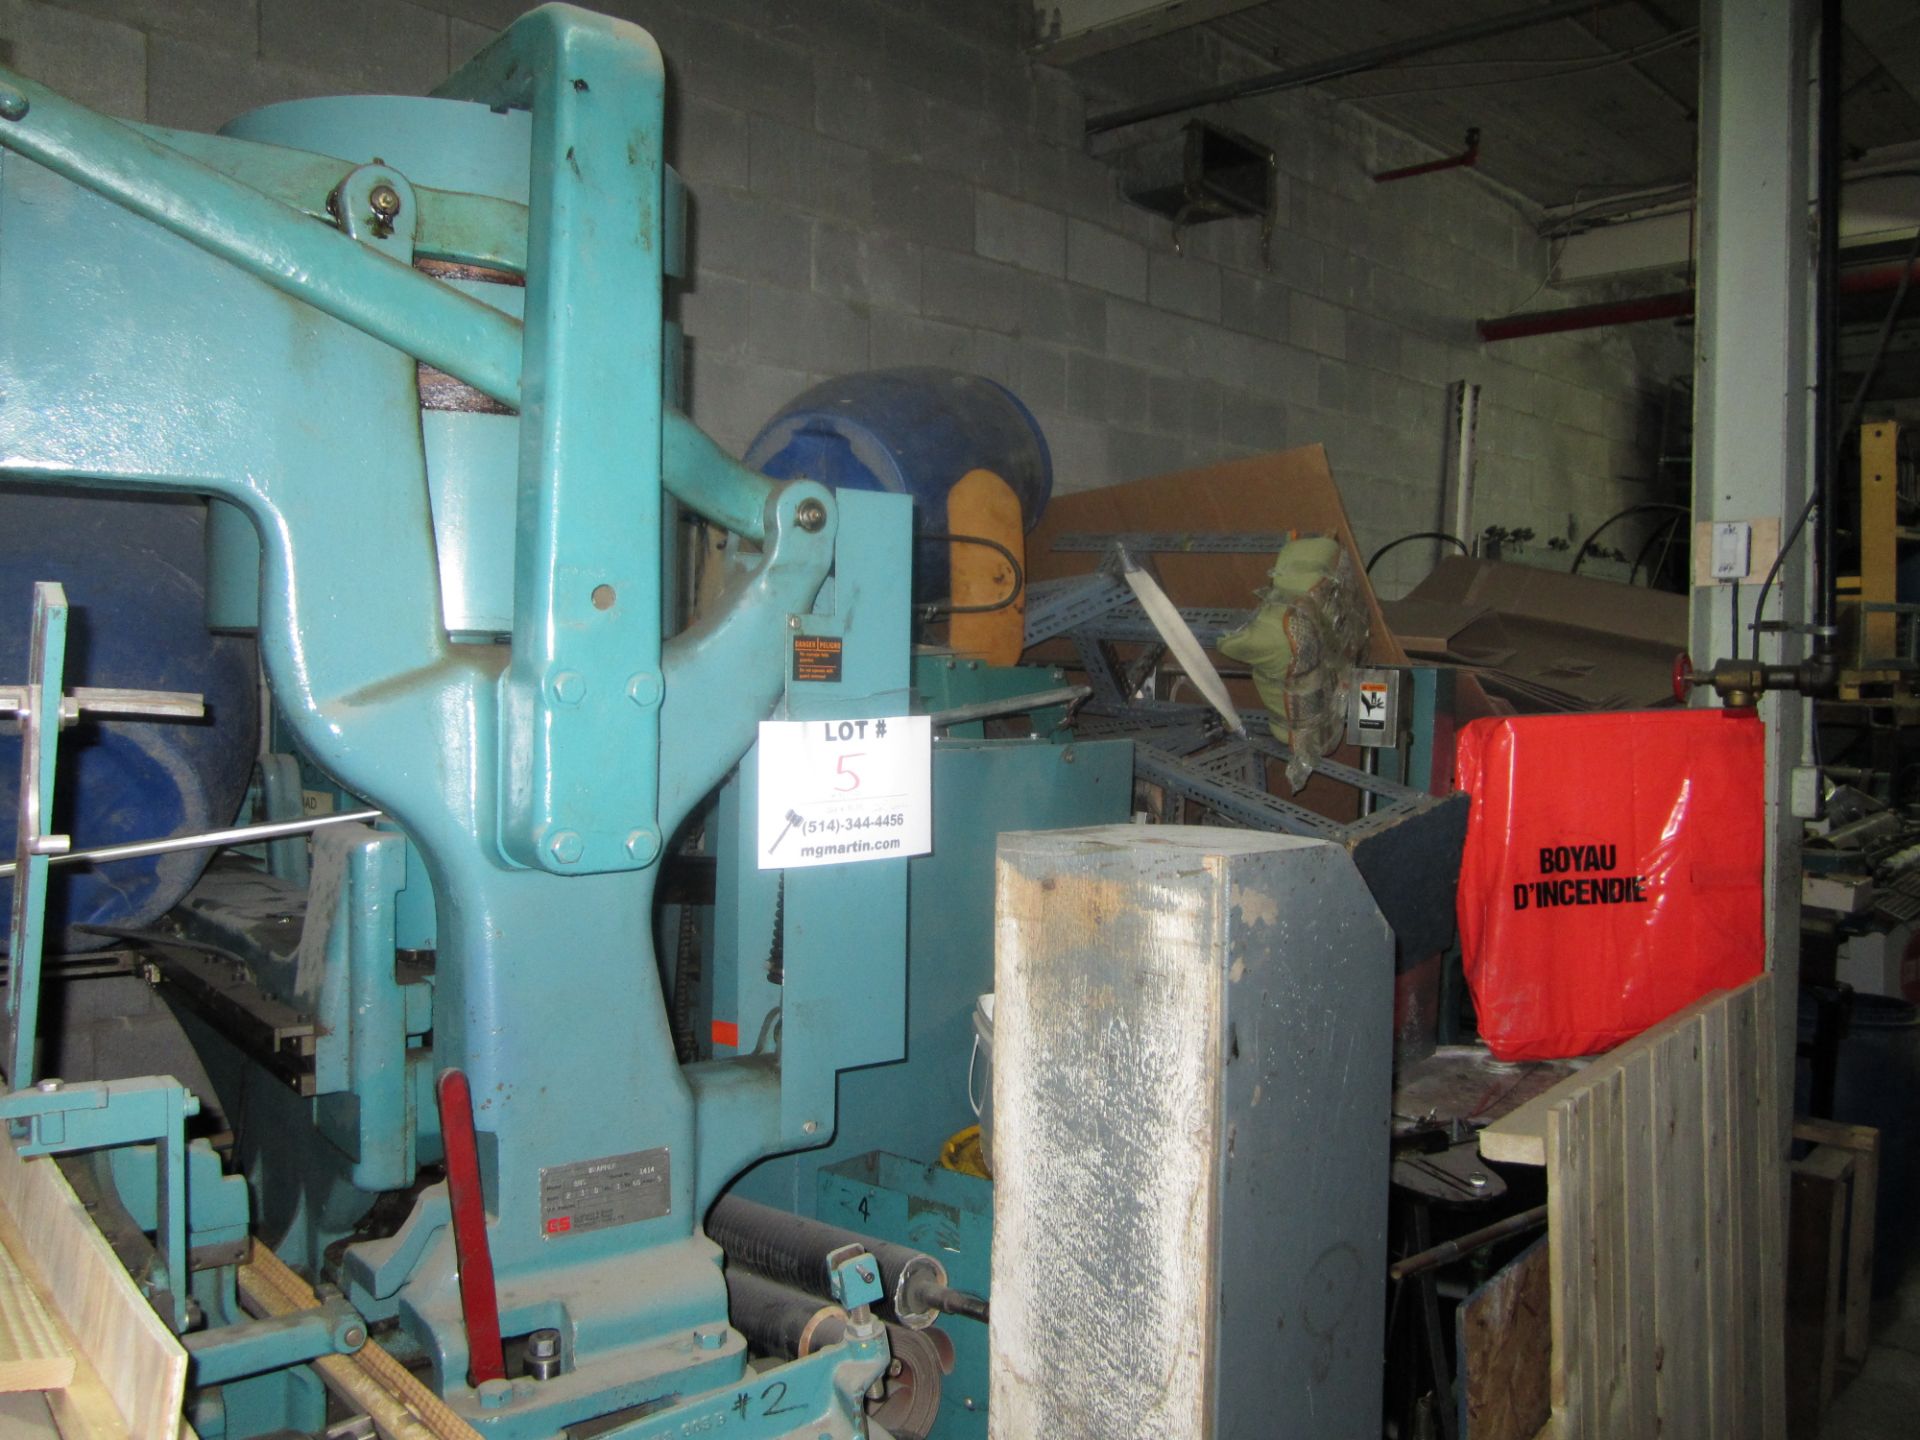 INCLUDING: CRATHERM & SMITH WRAPPER #1142 MODEL BNS SPOTTER 56 MODEL RBS S/N 56 AUTOMATIC GLUER ,ETC - Image 24 of 26